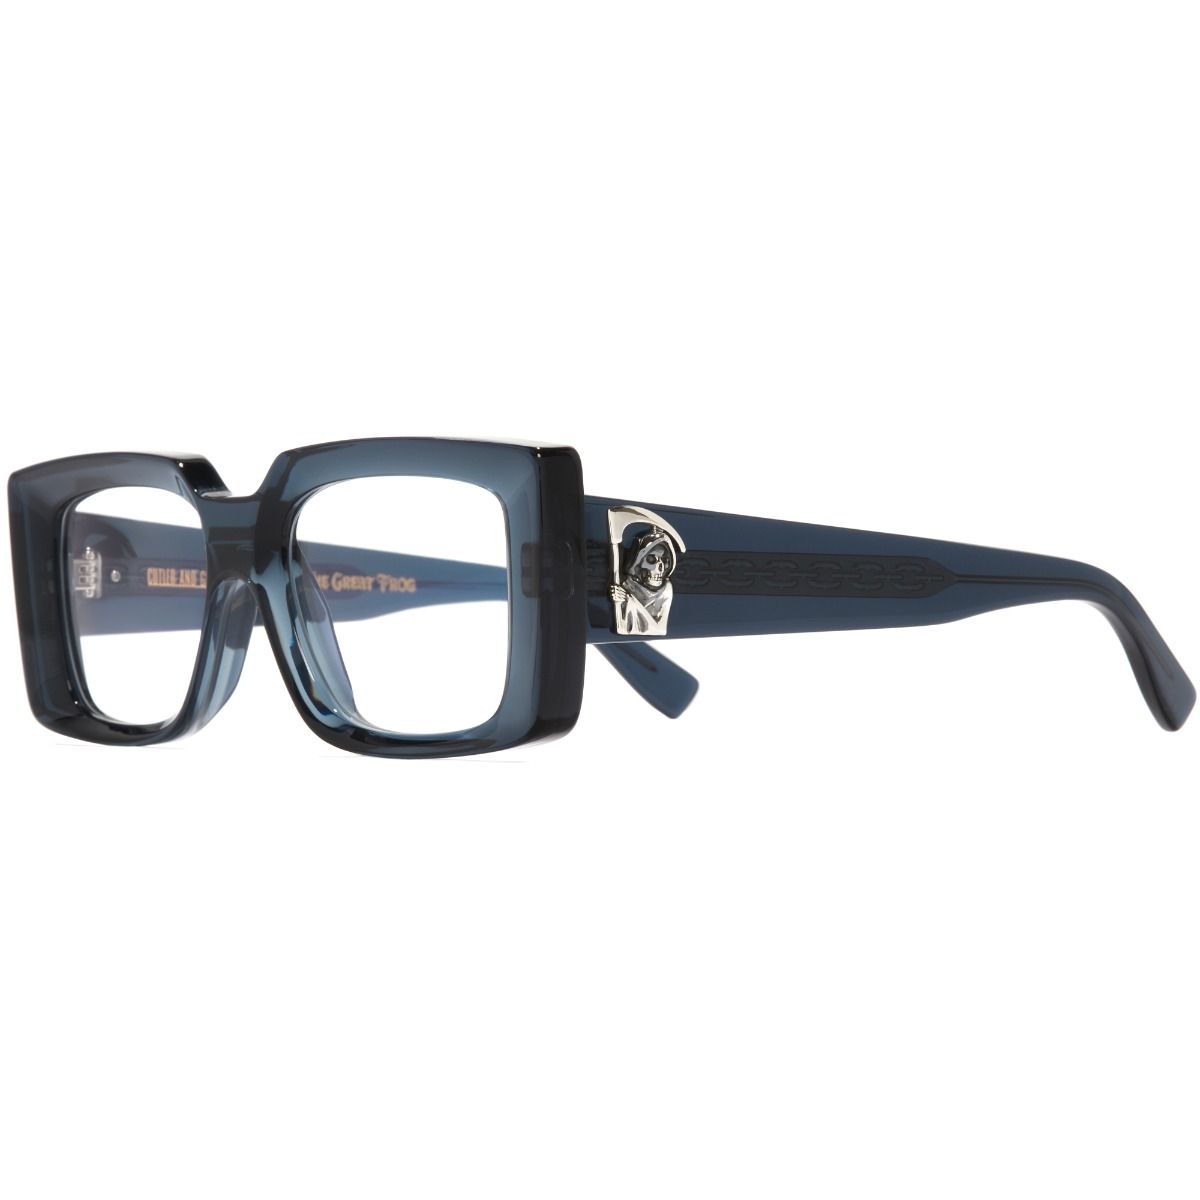 The Great Frog Mini Reaper Square Optical Glasses-Deep Blue Crystal